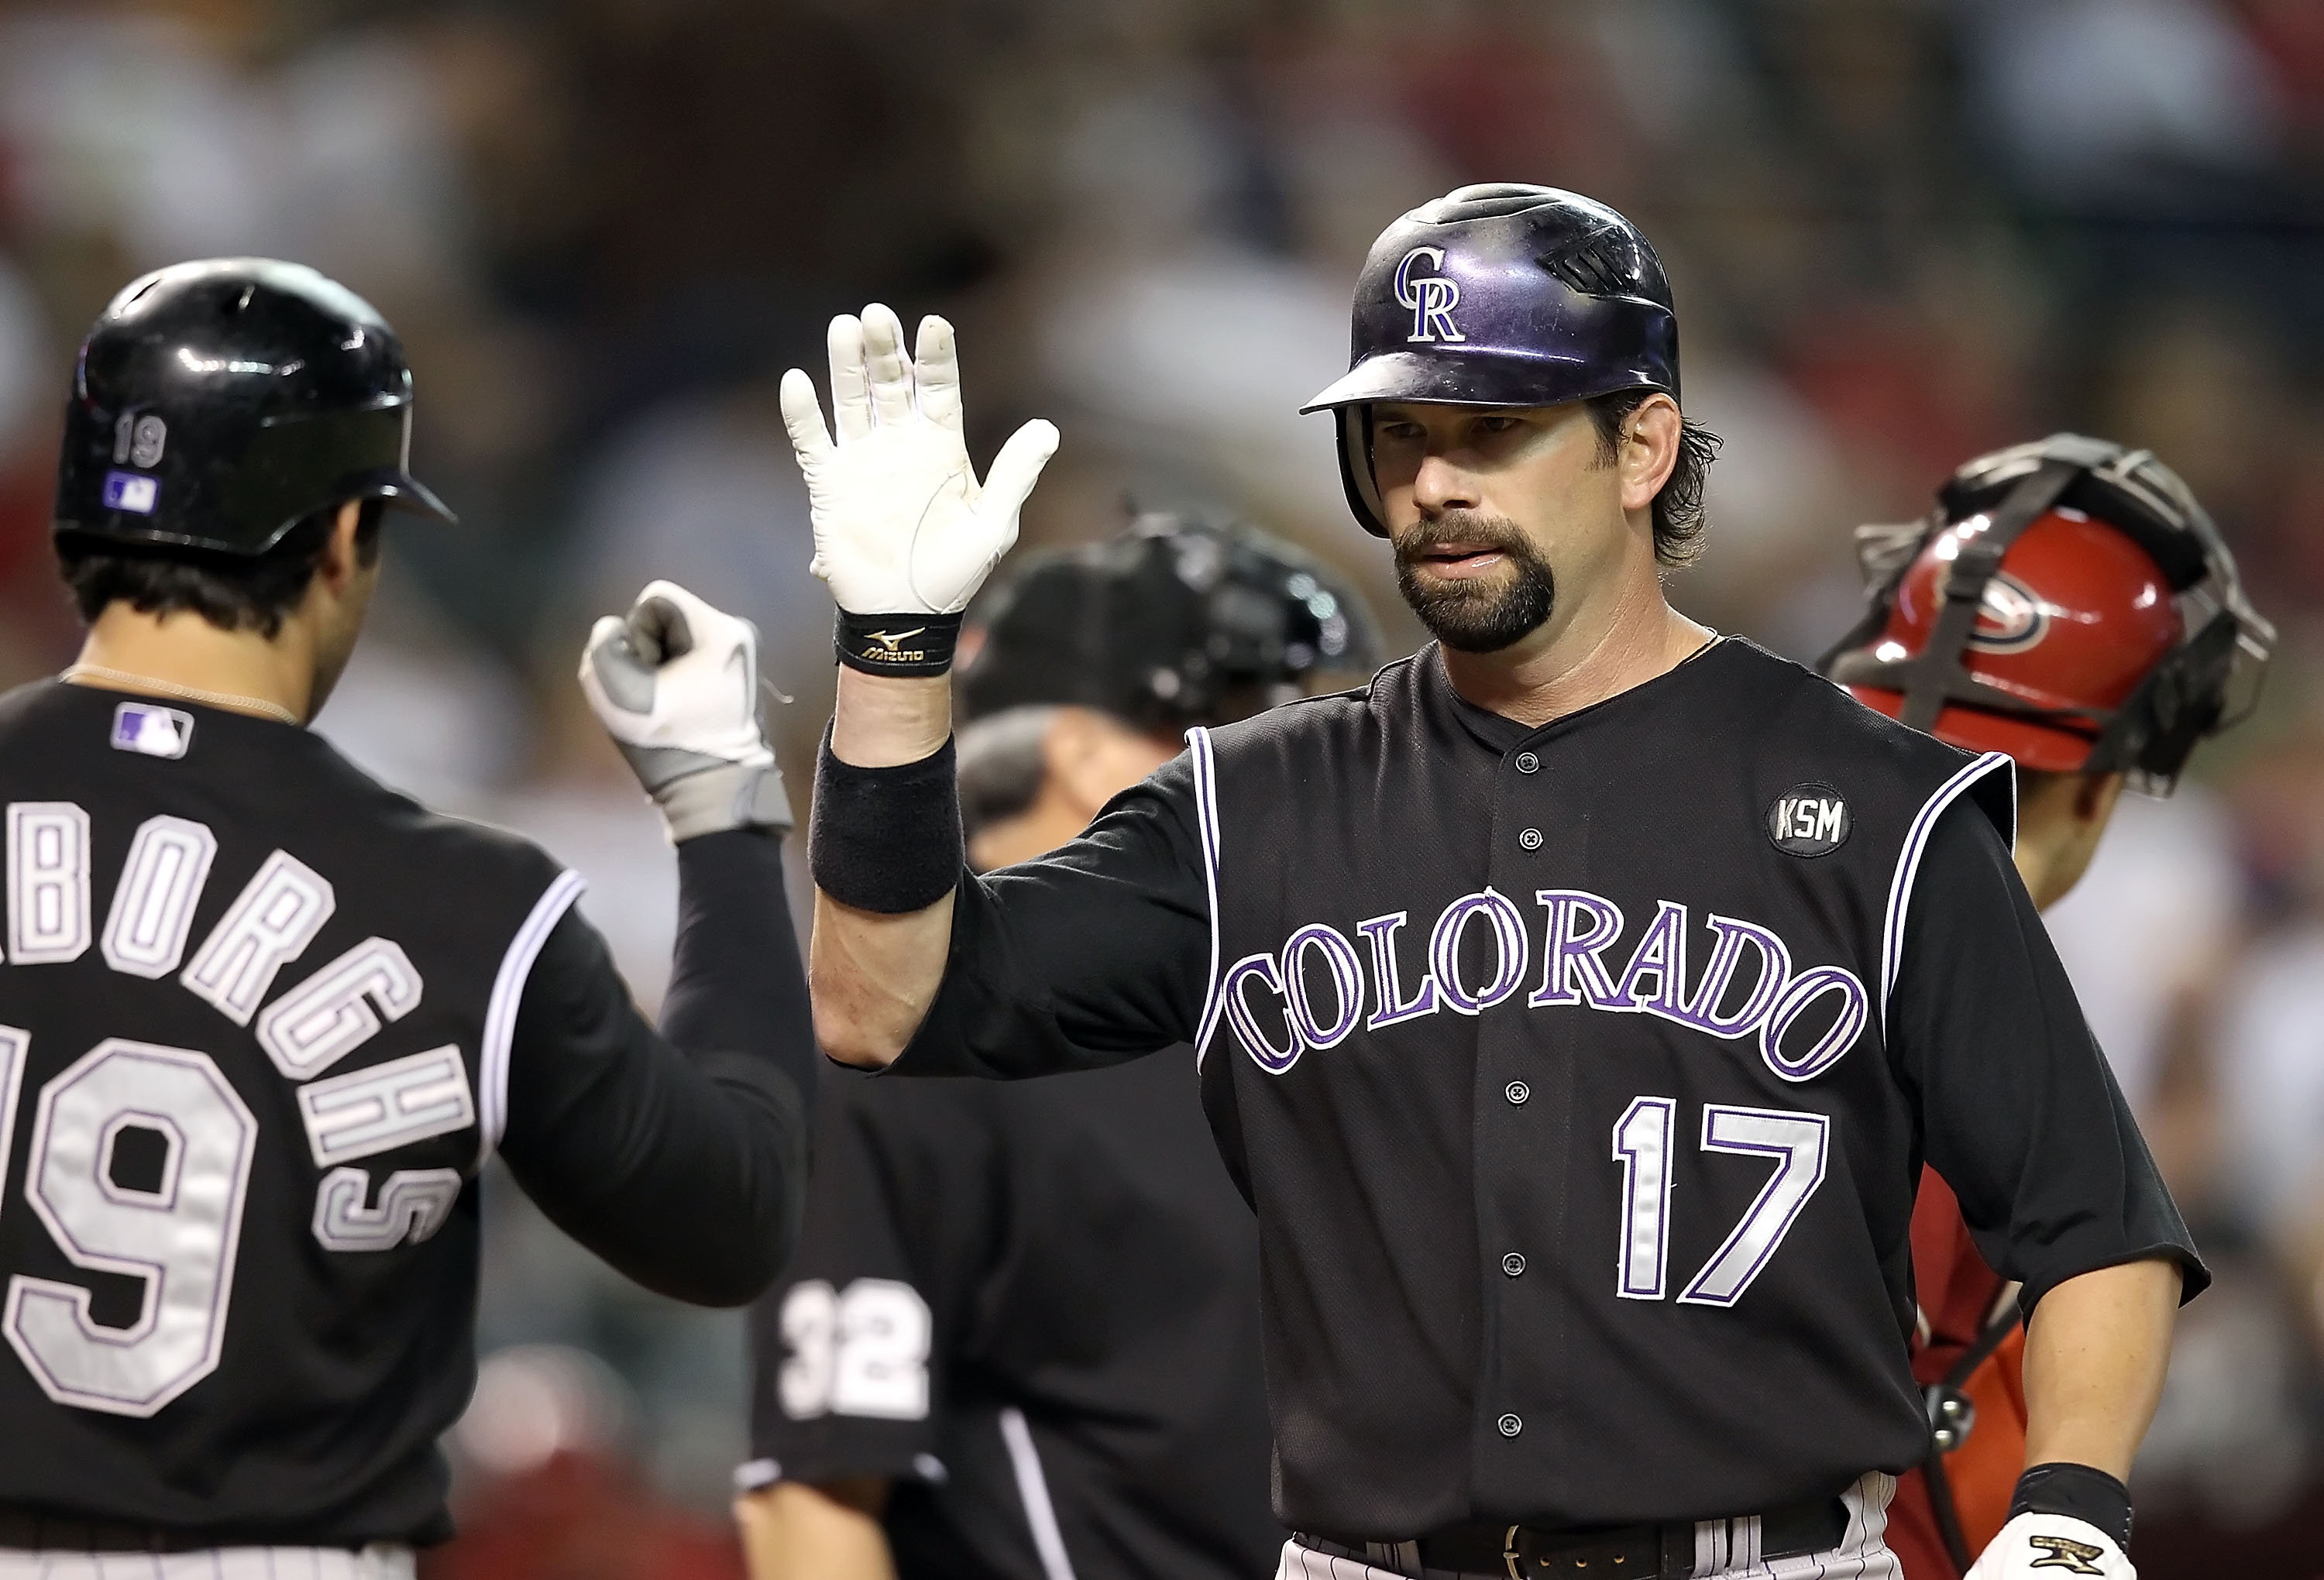 PHOENIX - SEPTEMBER 22:  Todd Helton #17 of the Colorado Rockies high fives teammate Ryan Spilborghs #16 after Helton hit a solo home run against the Arizona Diamondbacks during the first inning of the Major League Baseball game at Chase Field on Septembe